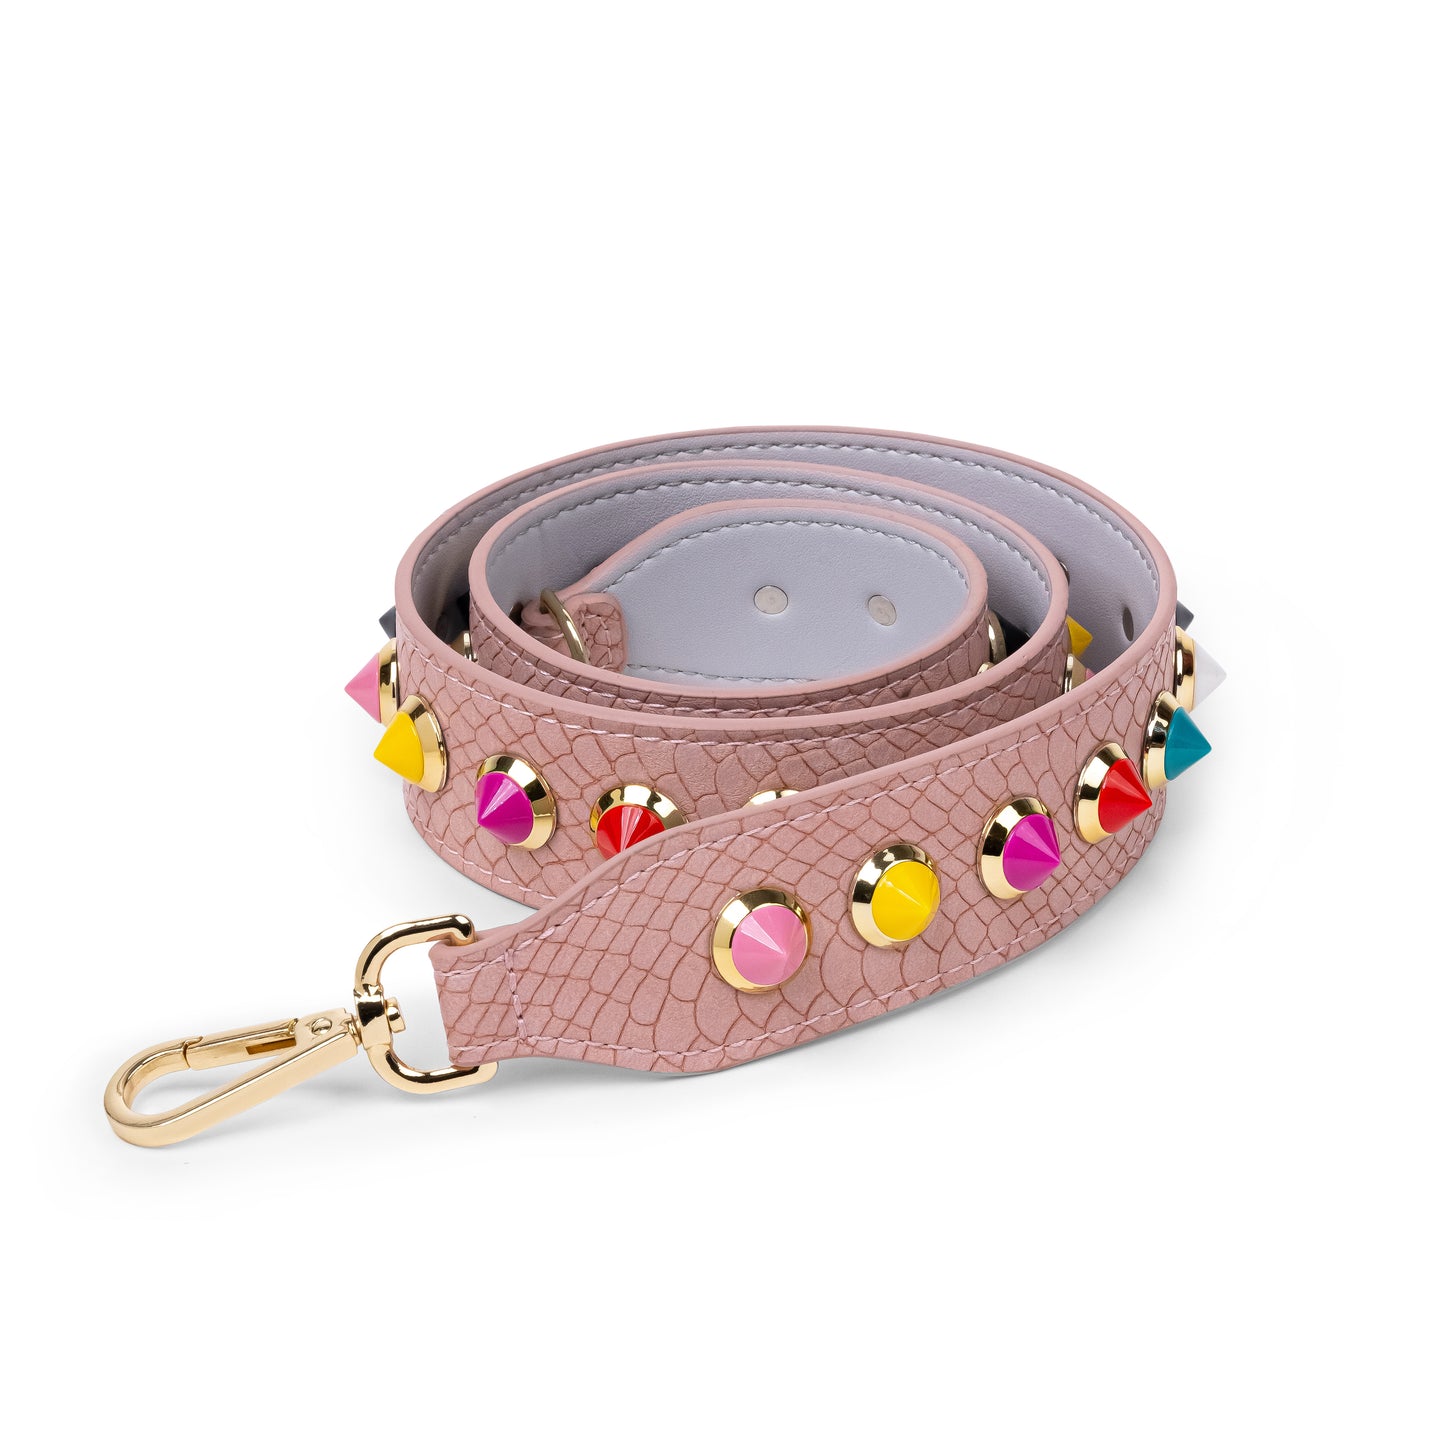 Rolled up pink bag strap with multicoloured studs